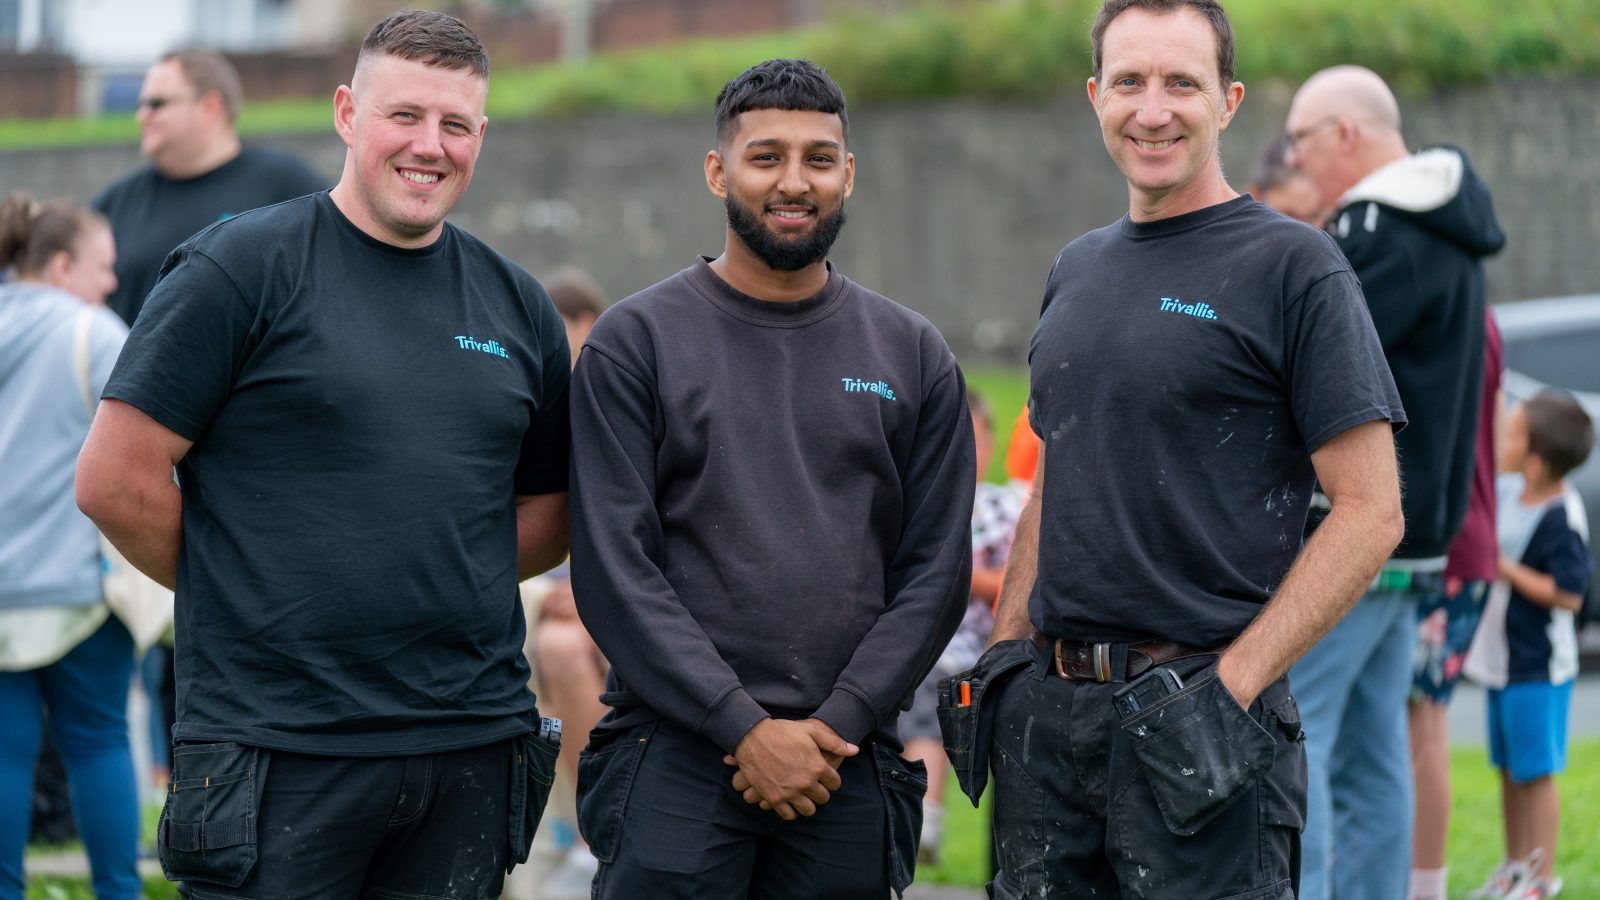 Three smiling men in black work shirts and trousers standing together outdoors.